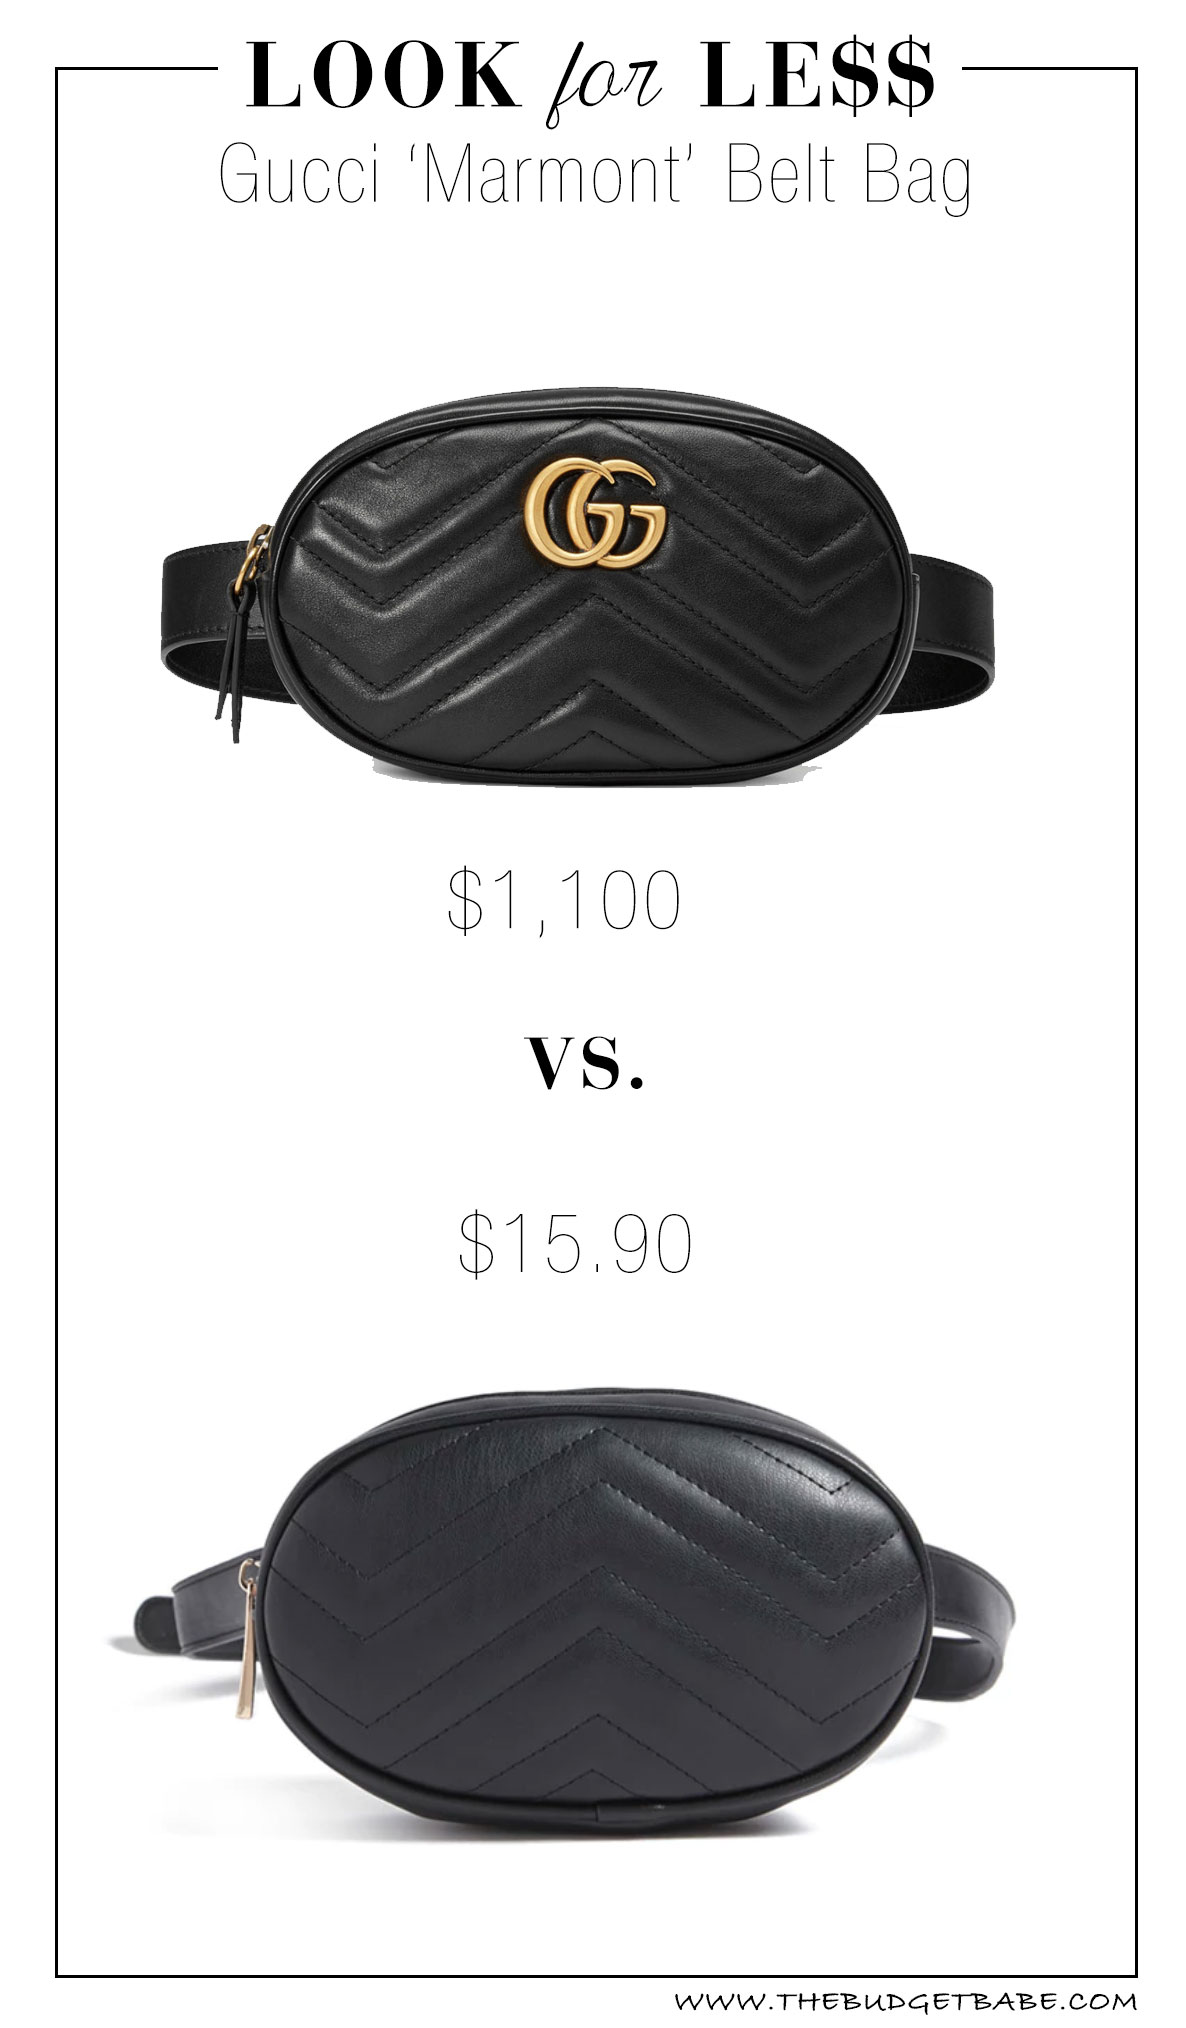 Gucci Marmont belt bag look for less dupe replica at Forever 21